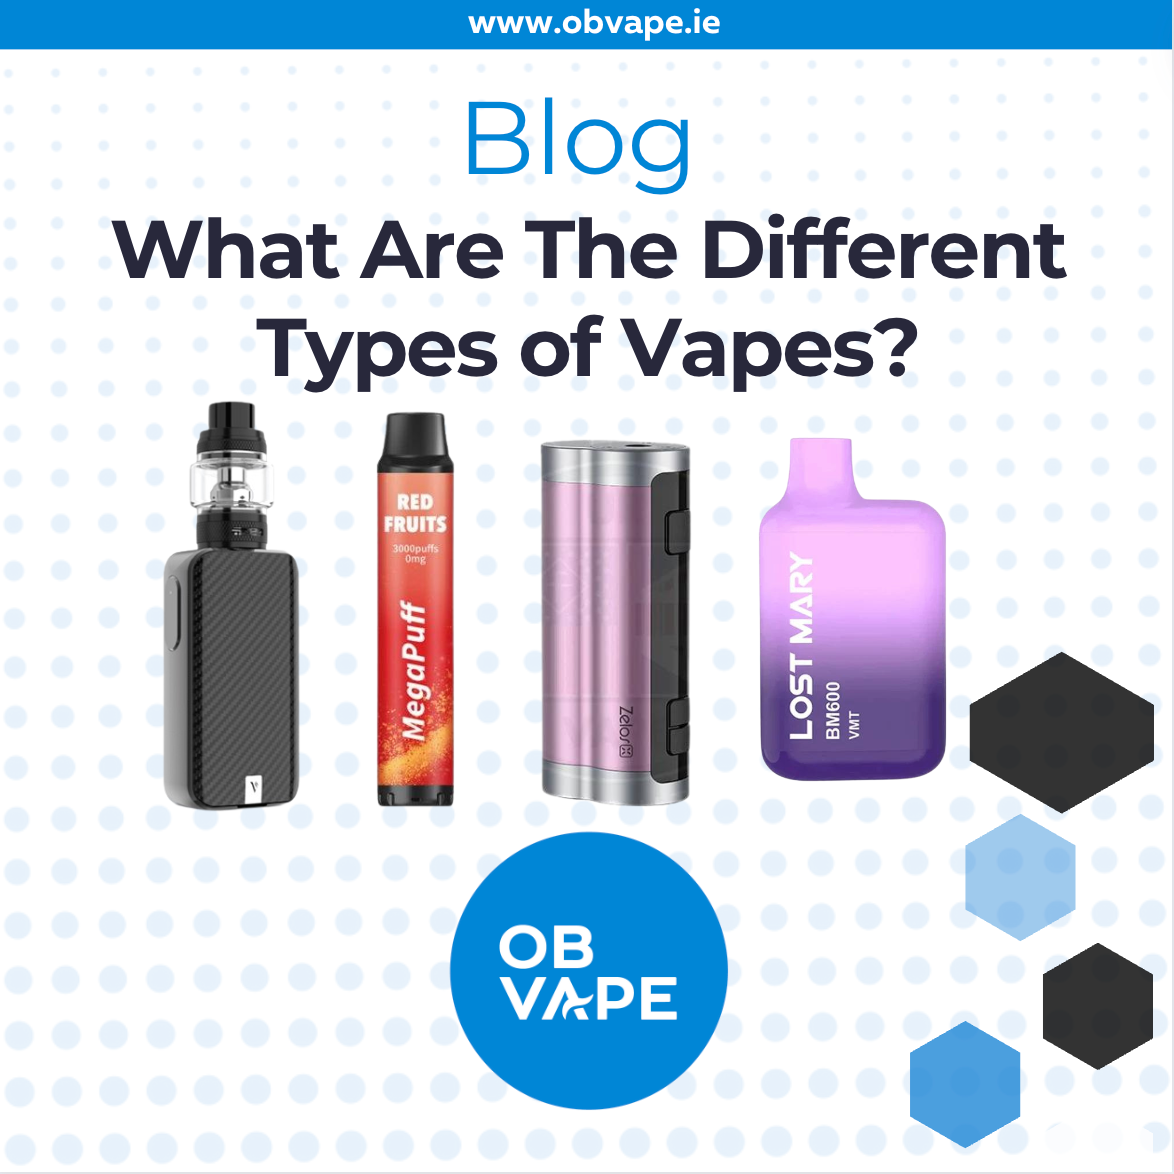 What Are The Different Types of Vapes?